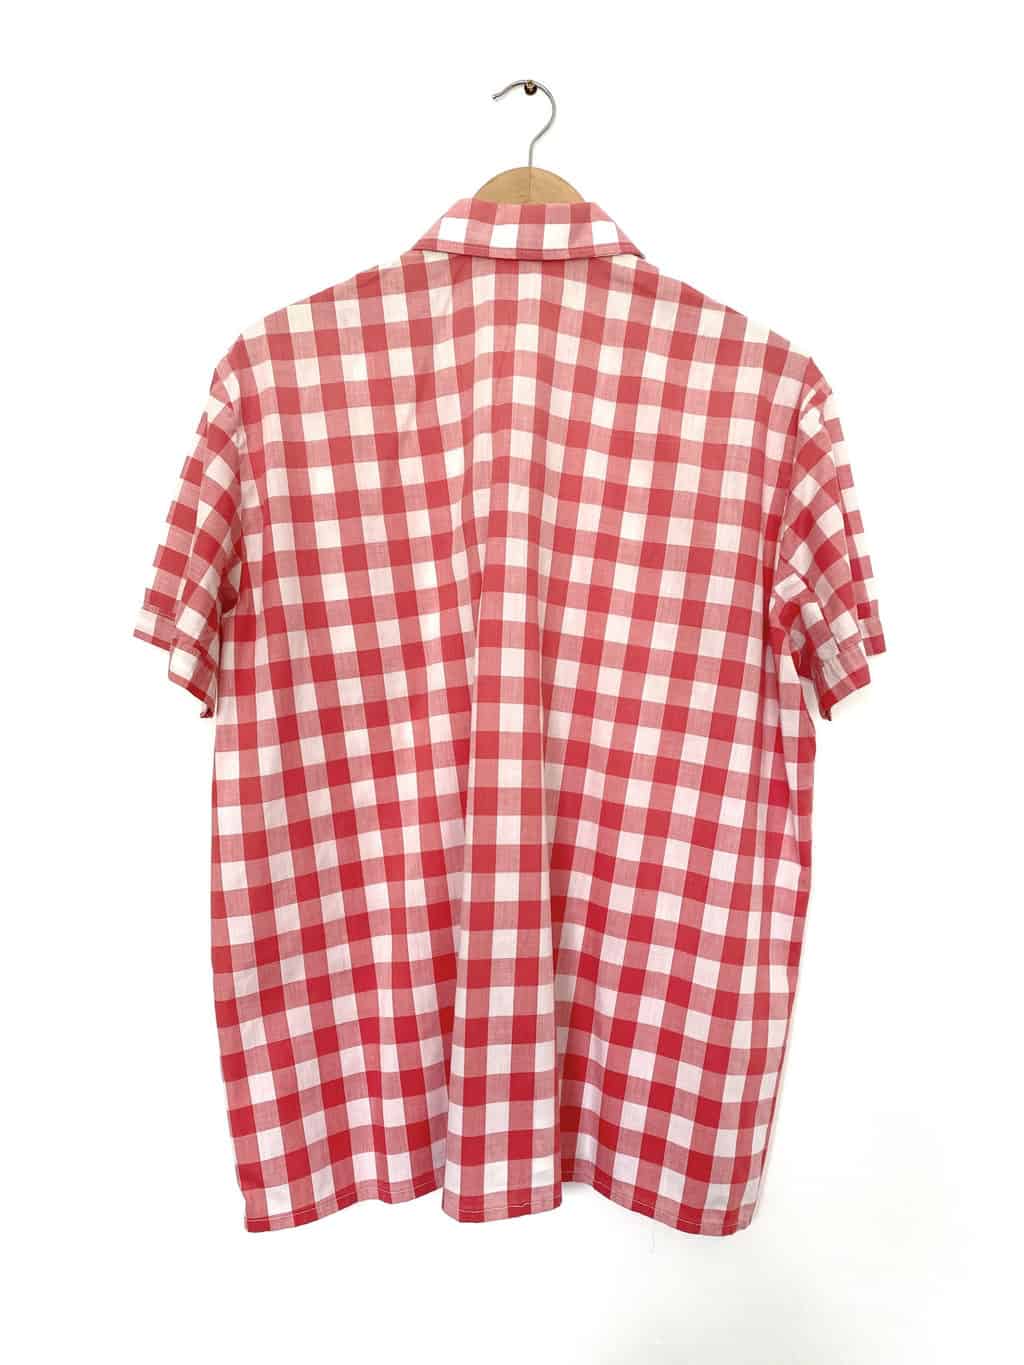 70s Red & White Check Shirt with Big Pointed Collar - L / XL - St Cyr ...